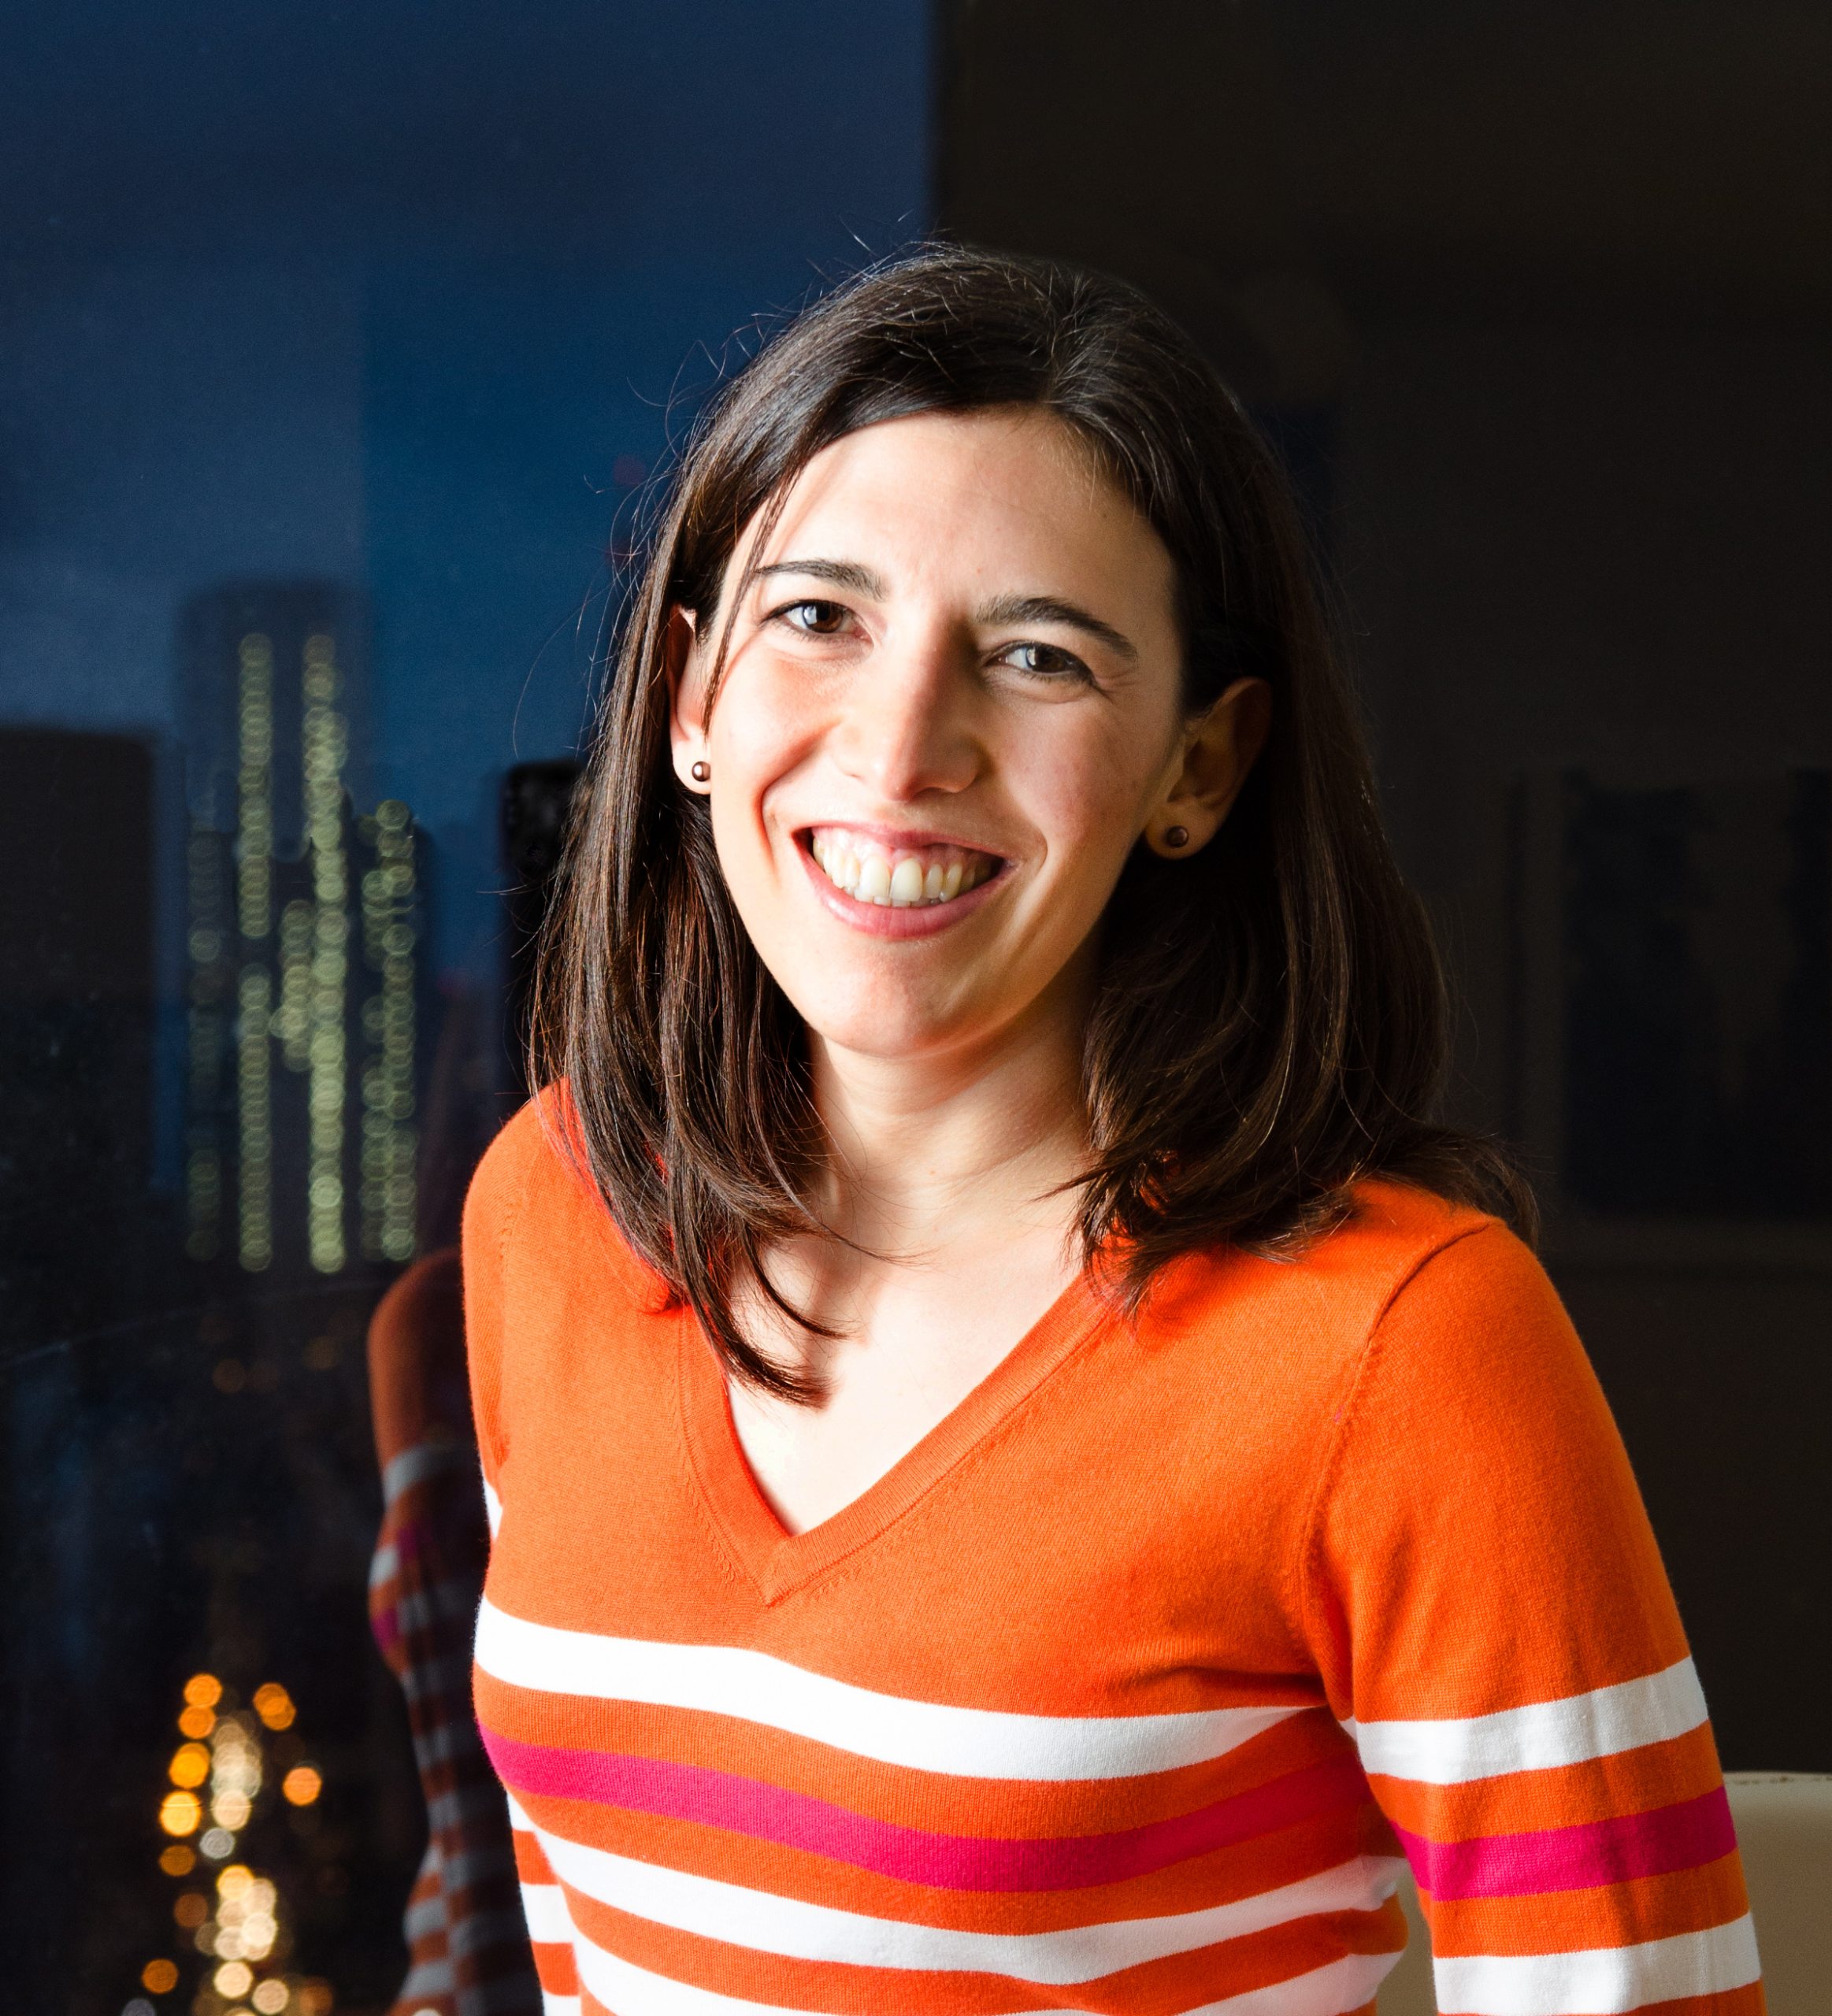 Carla Merino-Rajme smiling at the camera in a bright orange and white striped v-neck shirt with a night-time city skyline in the background.